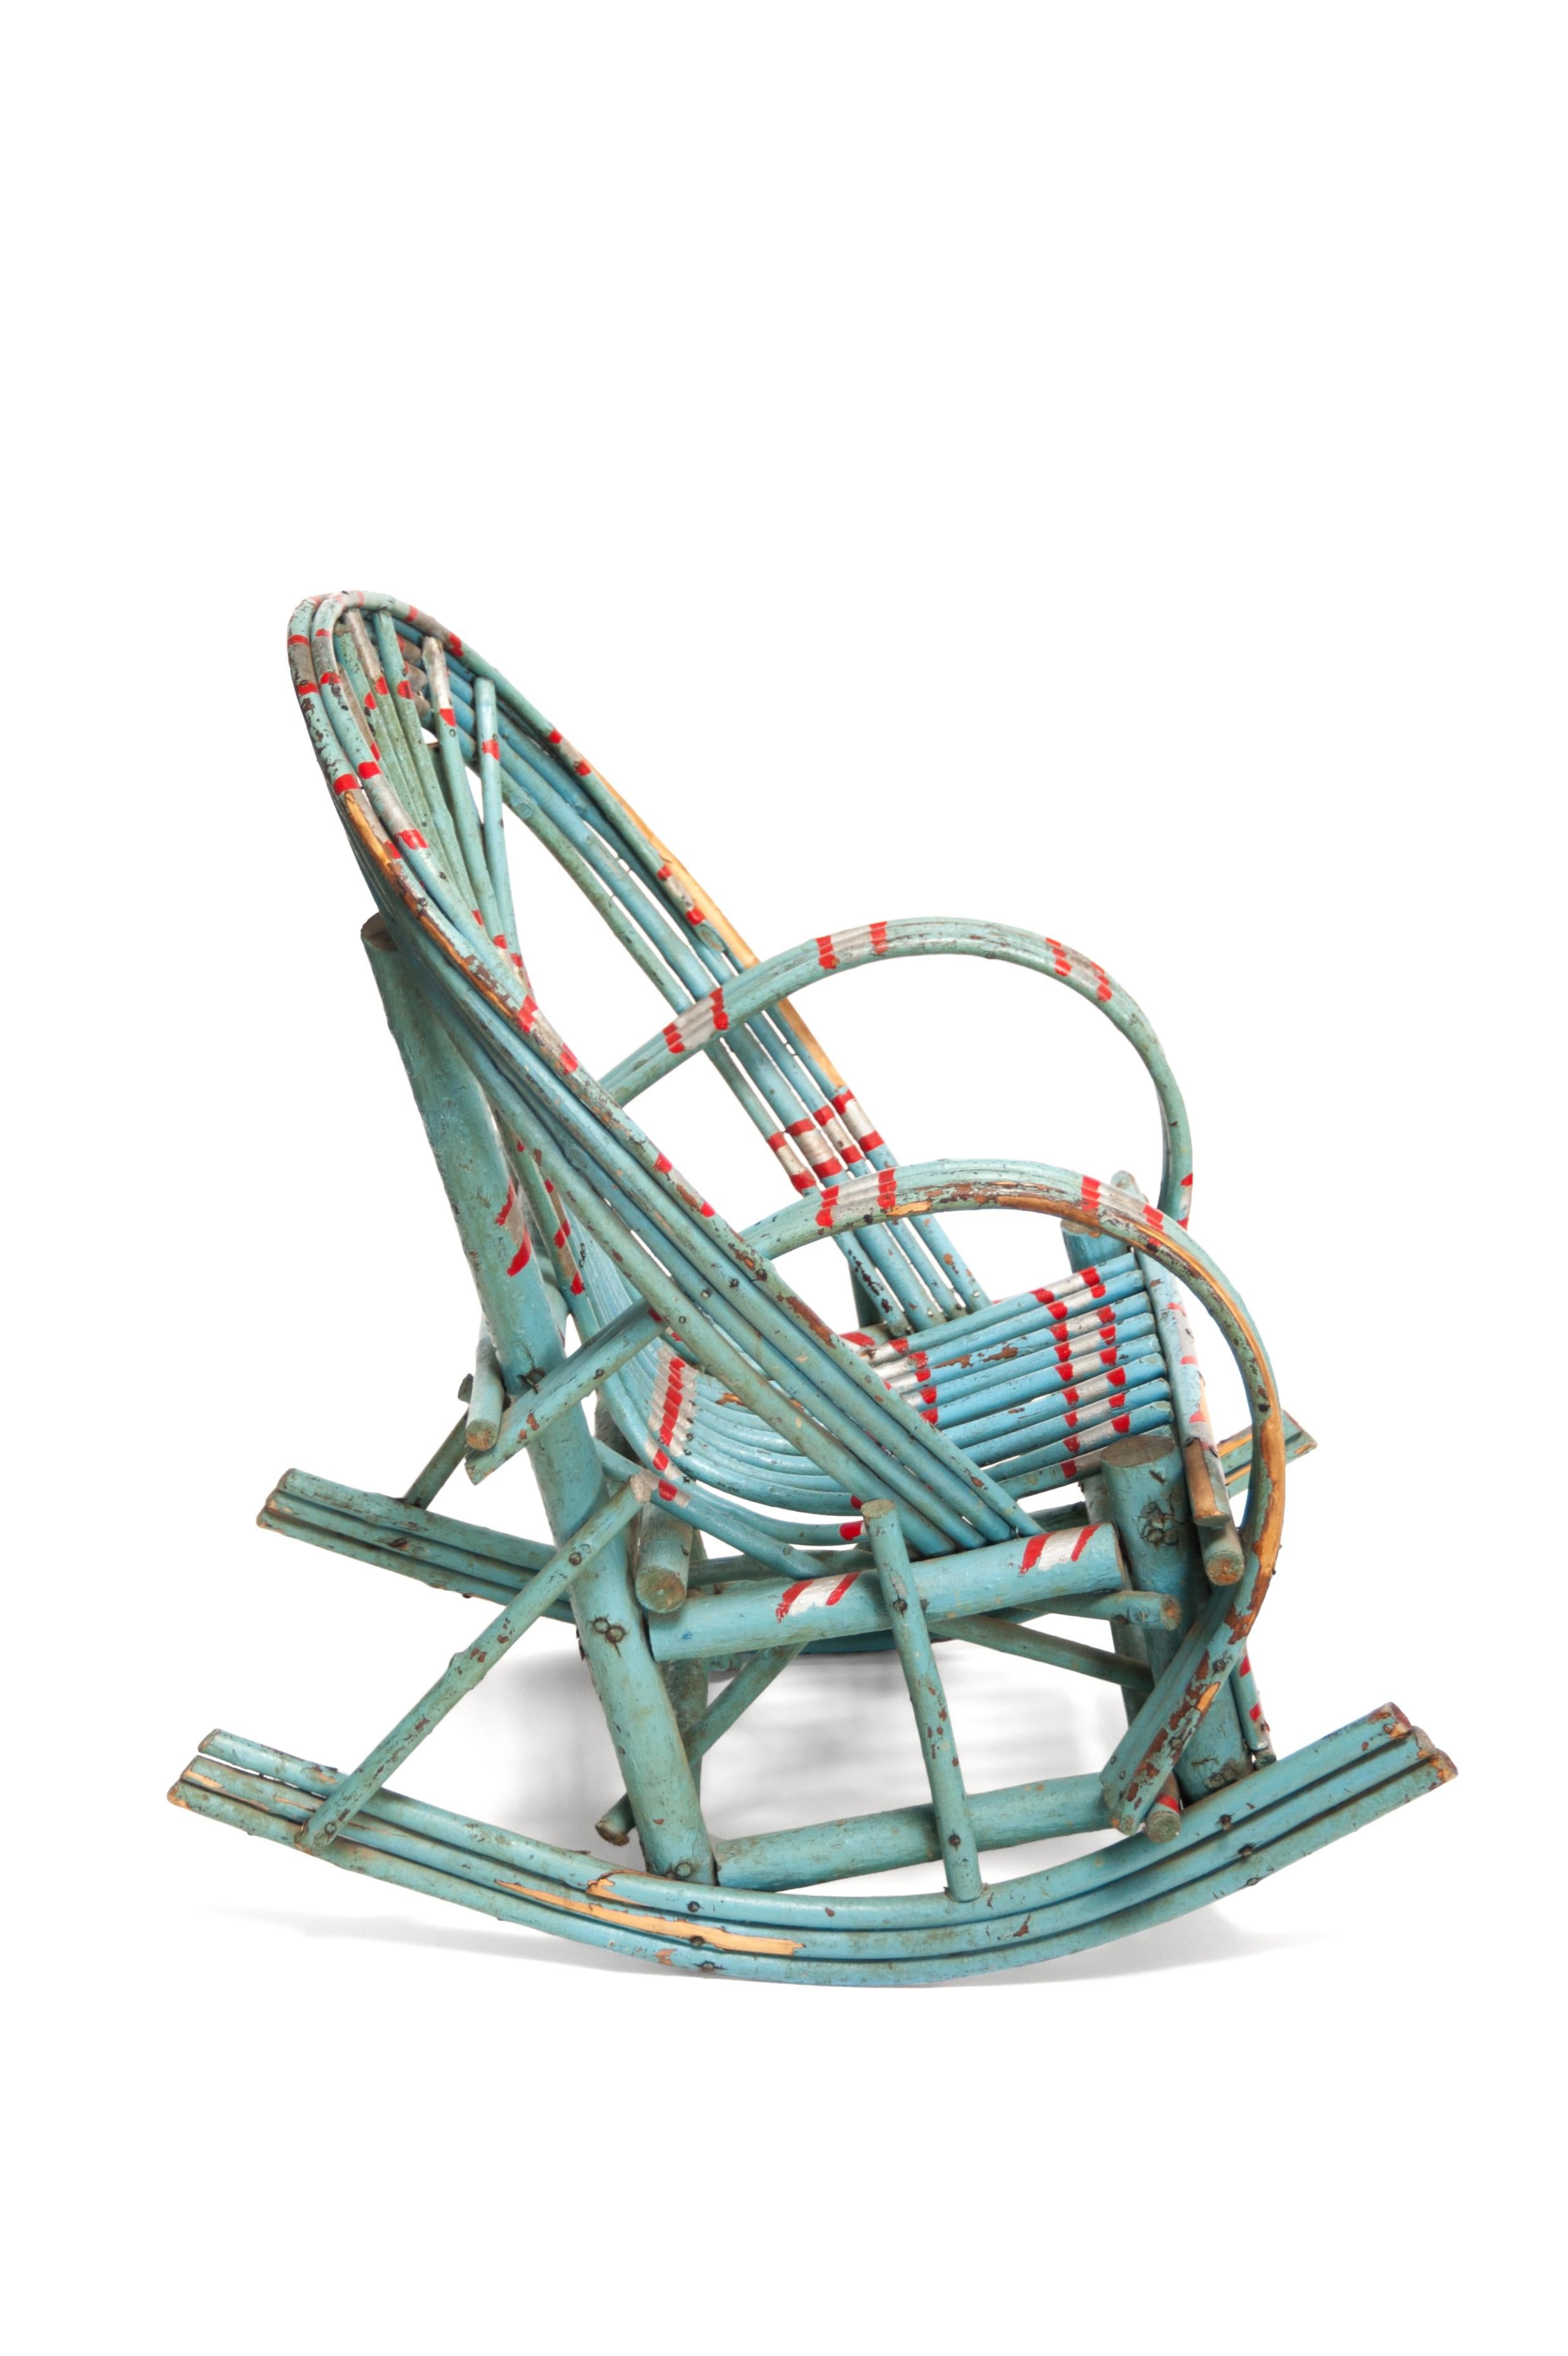 handcrafted rocking chair